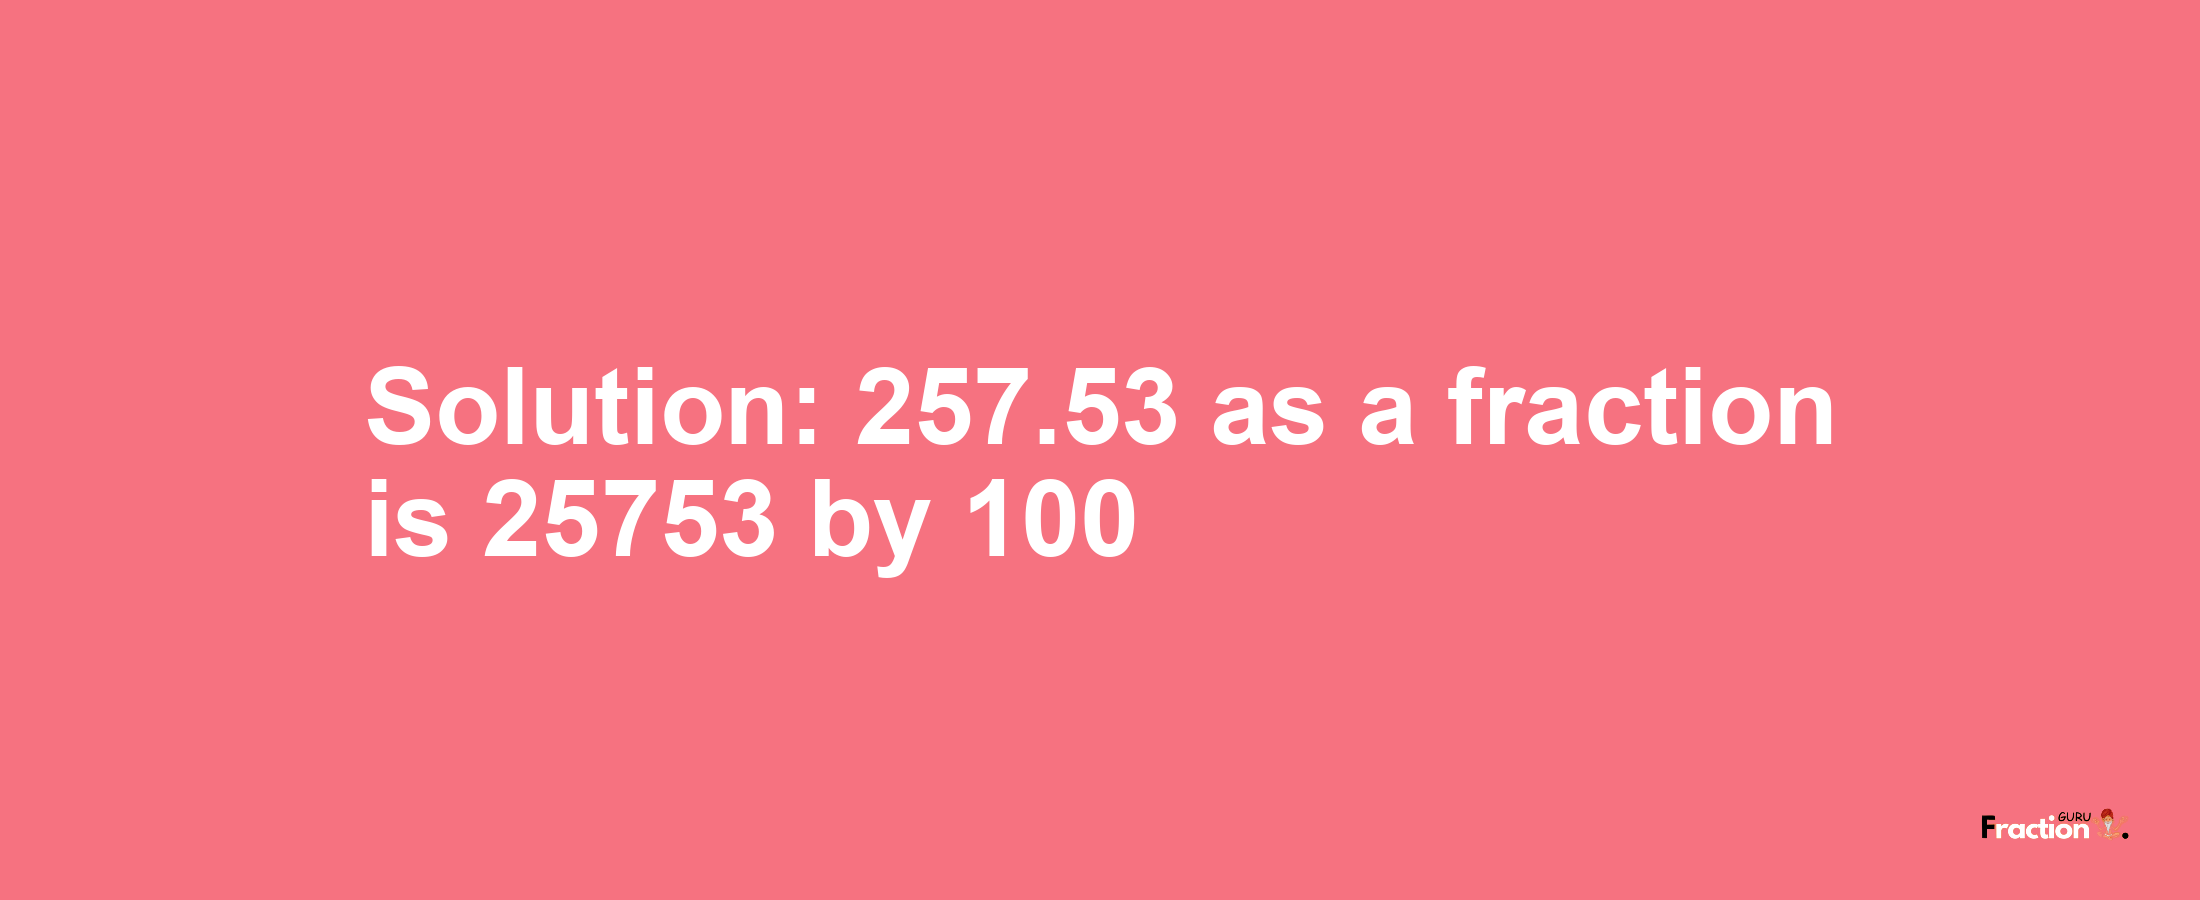 Solution:257.53 as a fraction is 25753/100